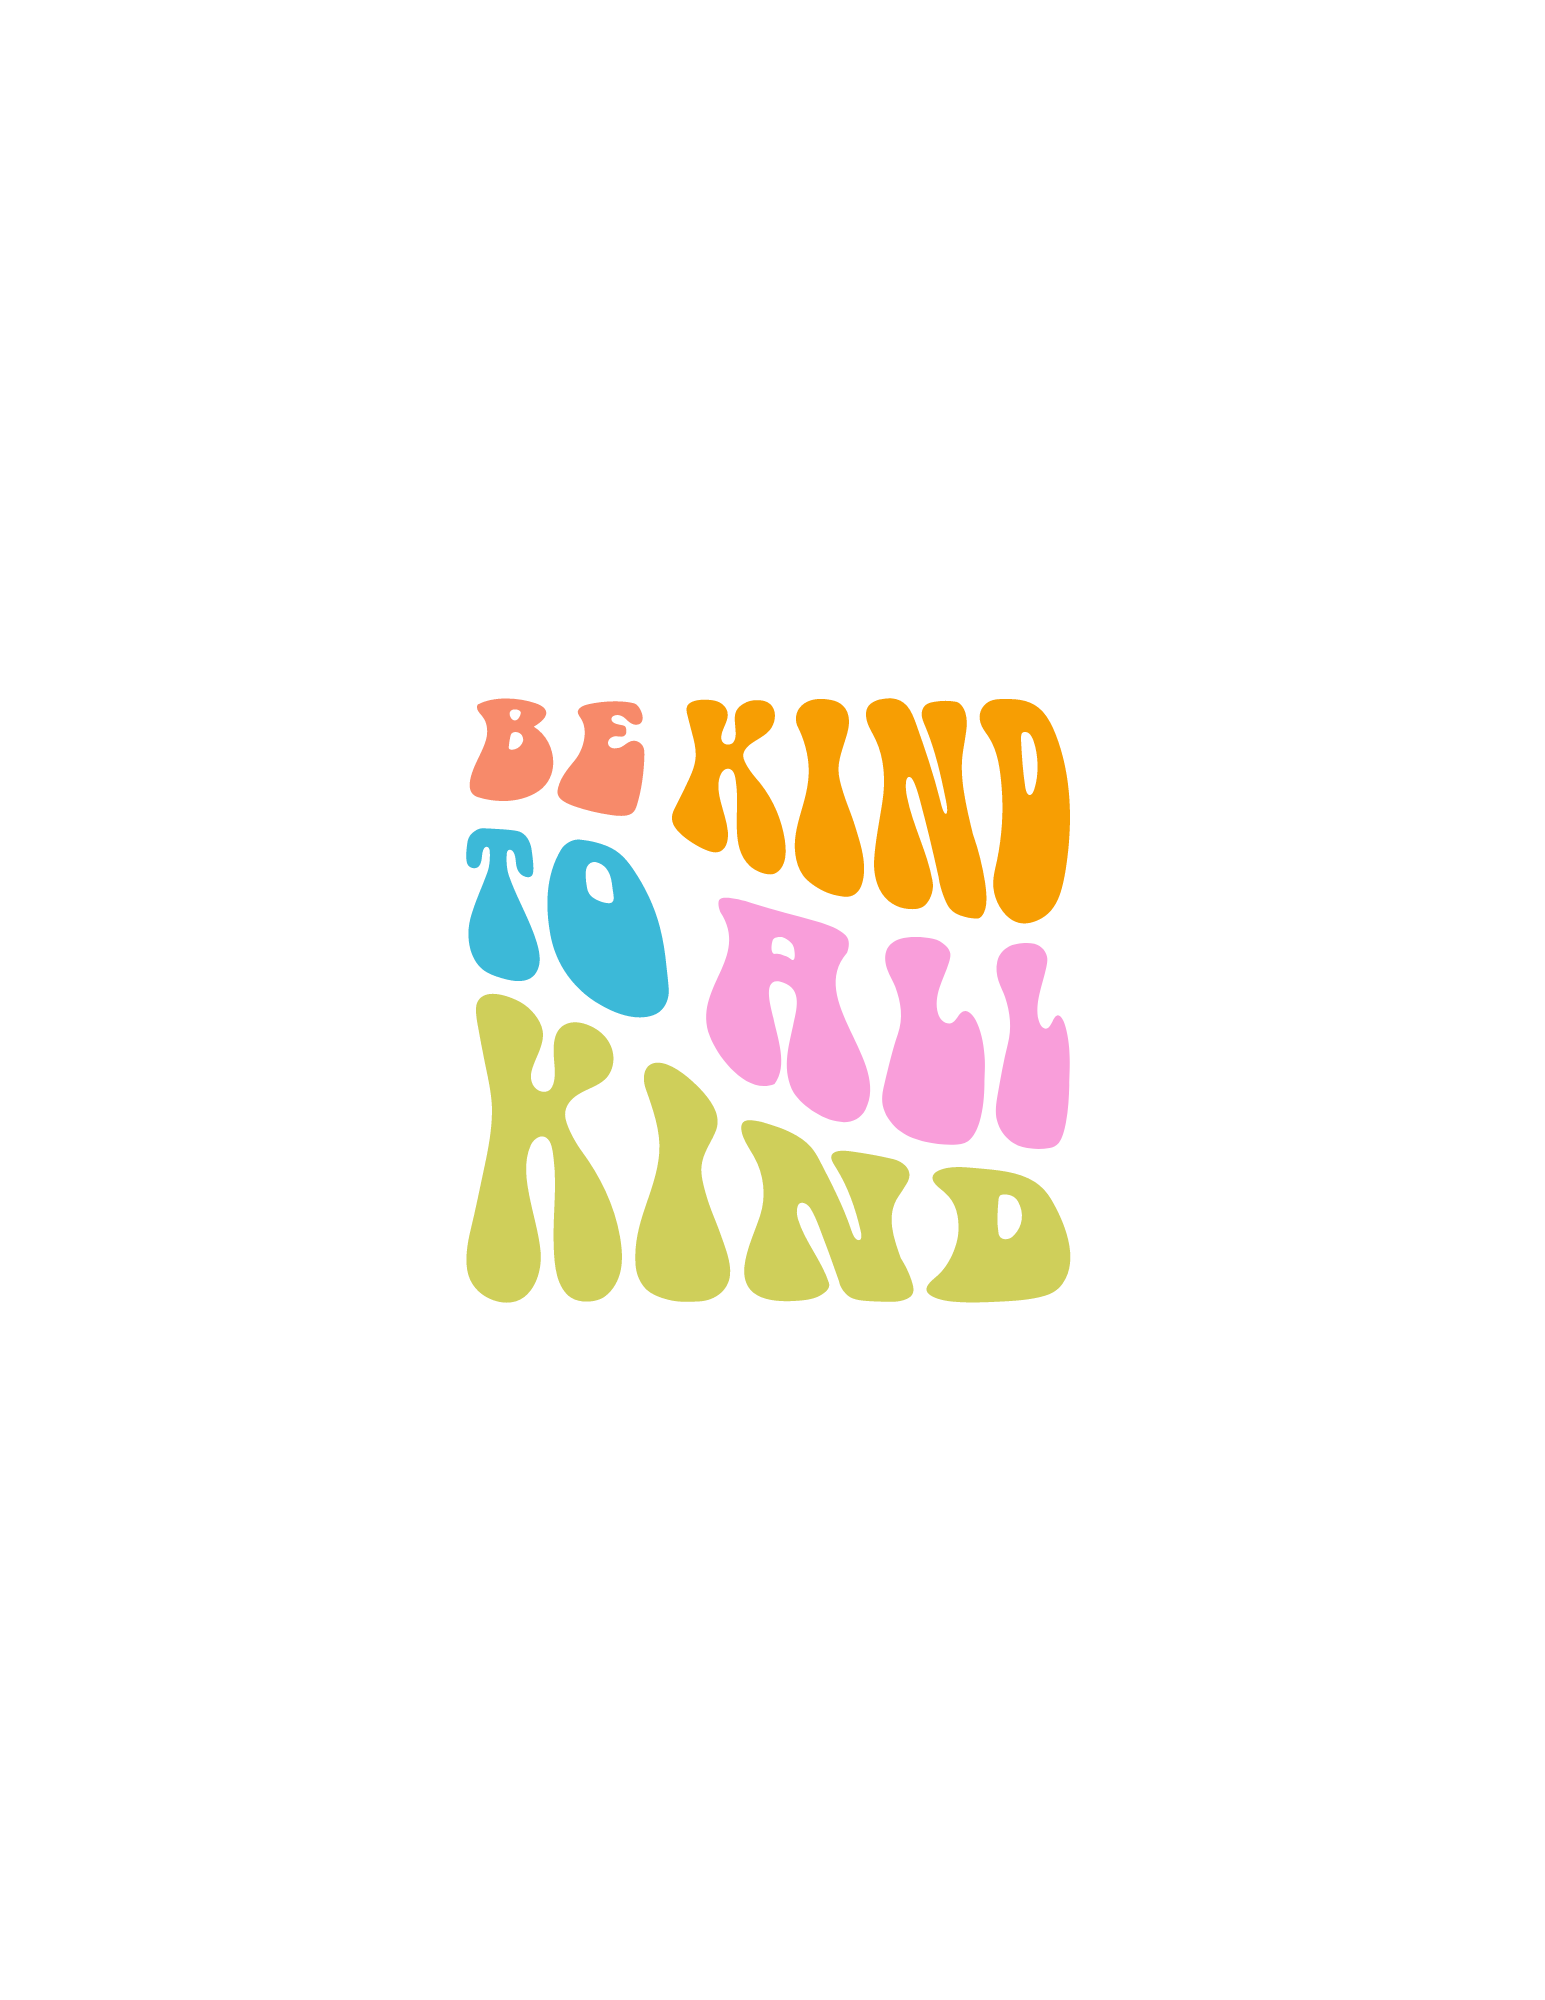 Be kind to all kind